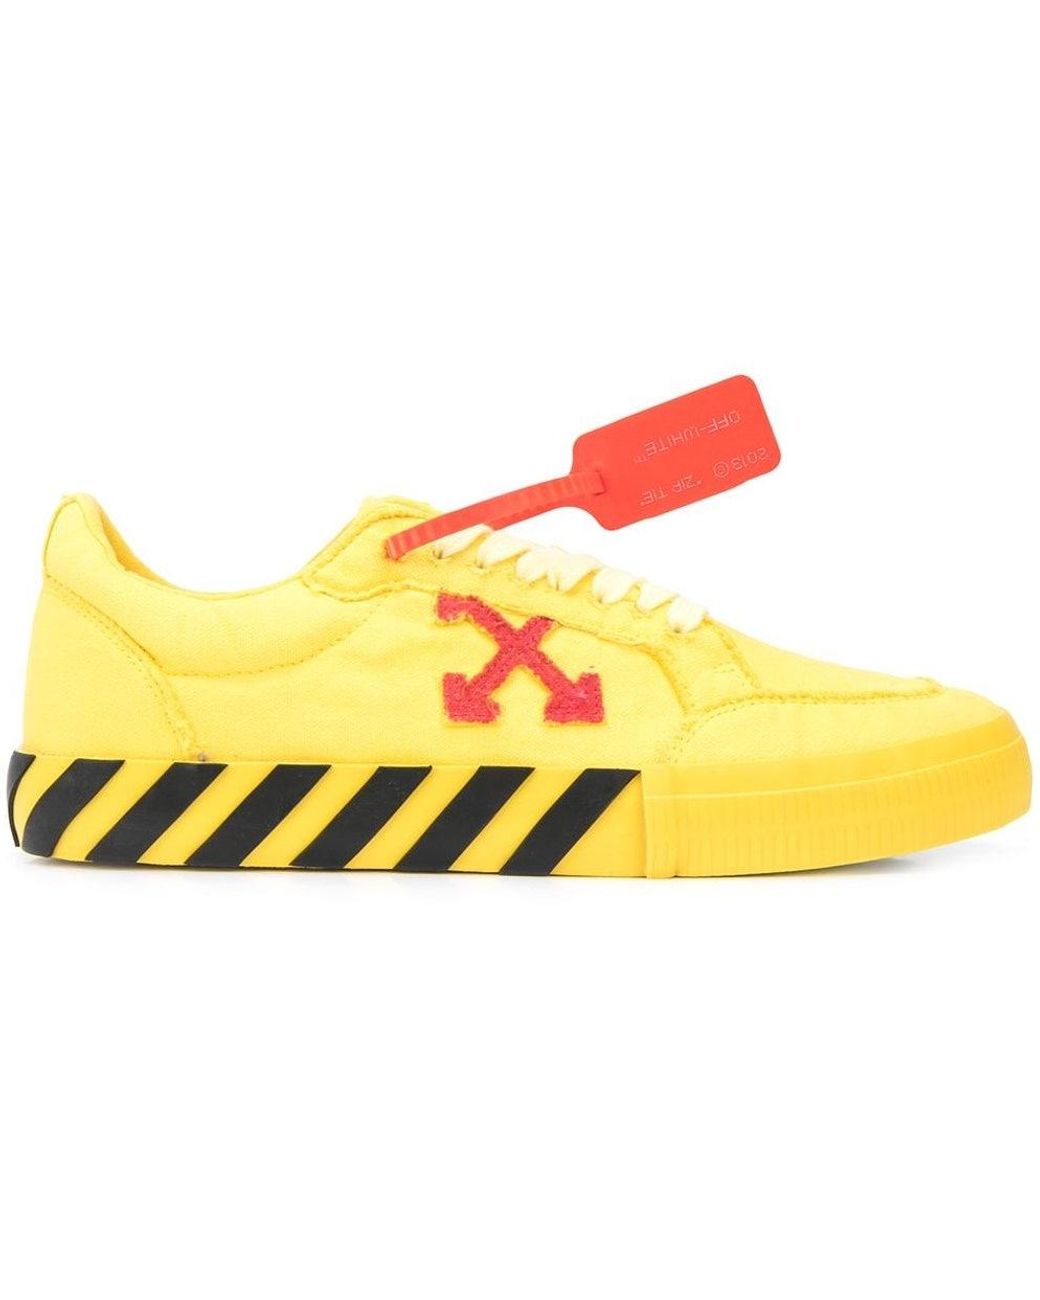 Off-White c/o Virgil Abloh Canvas Vulcanized Low Top Sneakers in Yellow ...